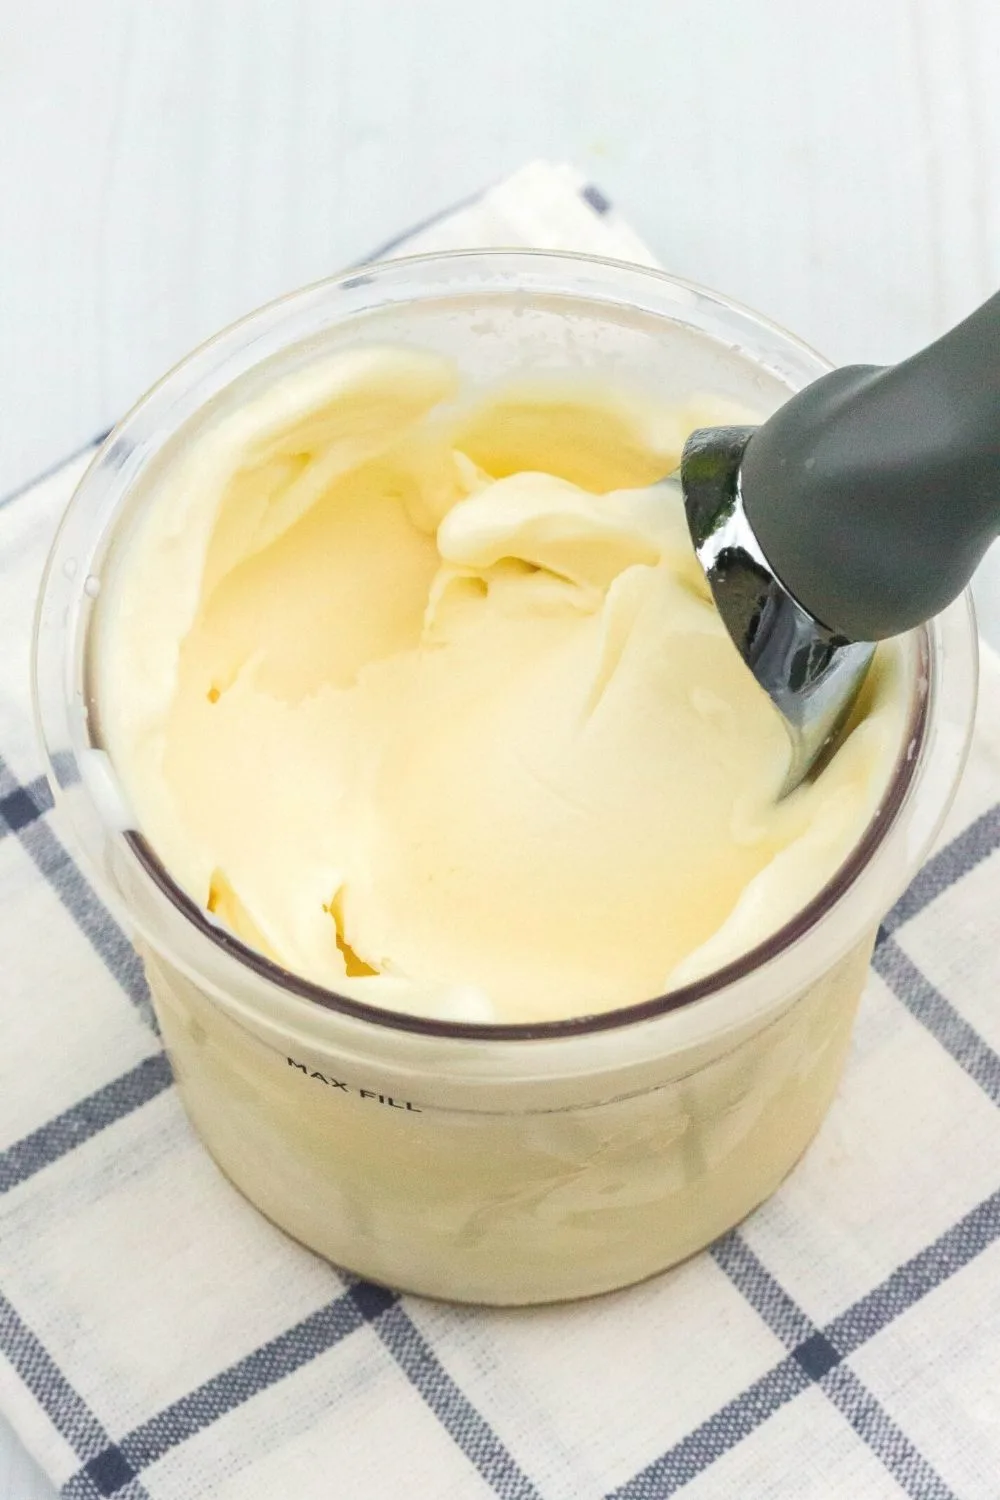 close-up view of a Ninja Creami pint container filled with vanilla ice cream made with cottage cheese. An ice cream scoop is in the ice cream.